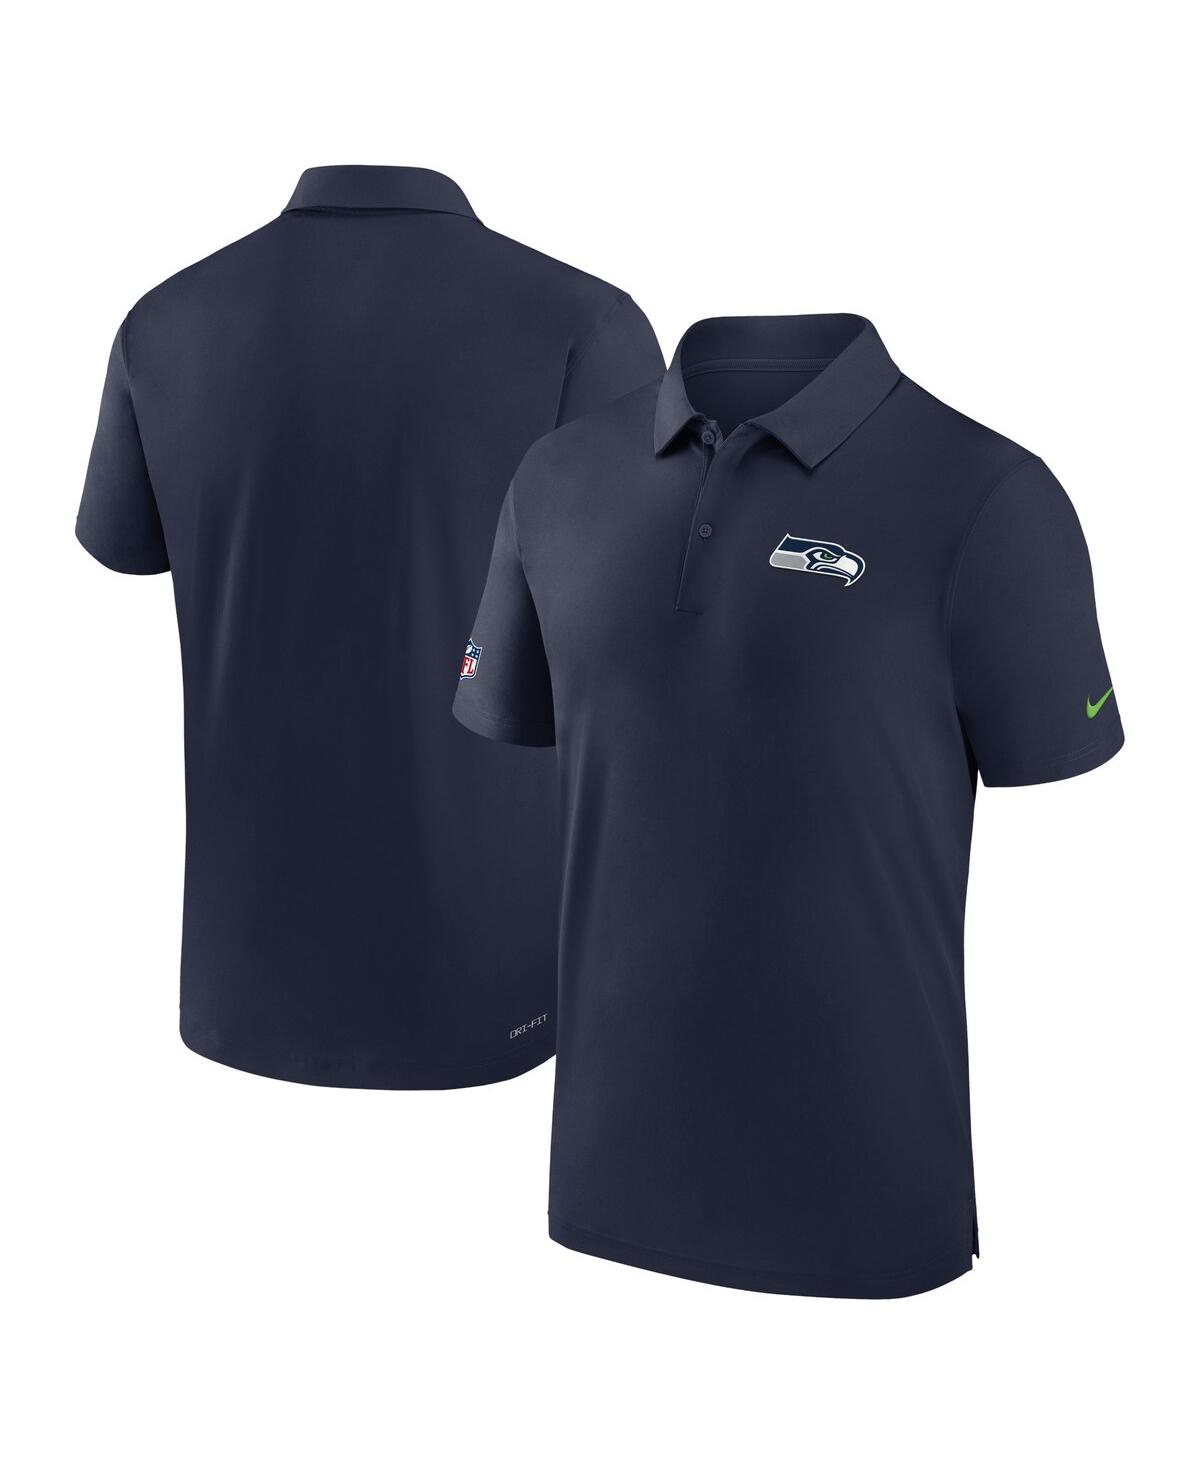 Shop Nike Men's  College Navy Seattle Seahawks Sideline Coaches Performance Polo Shirt